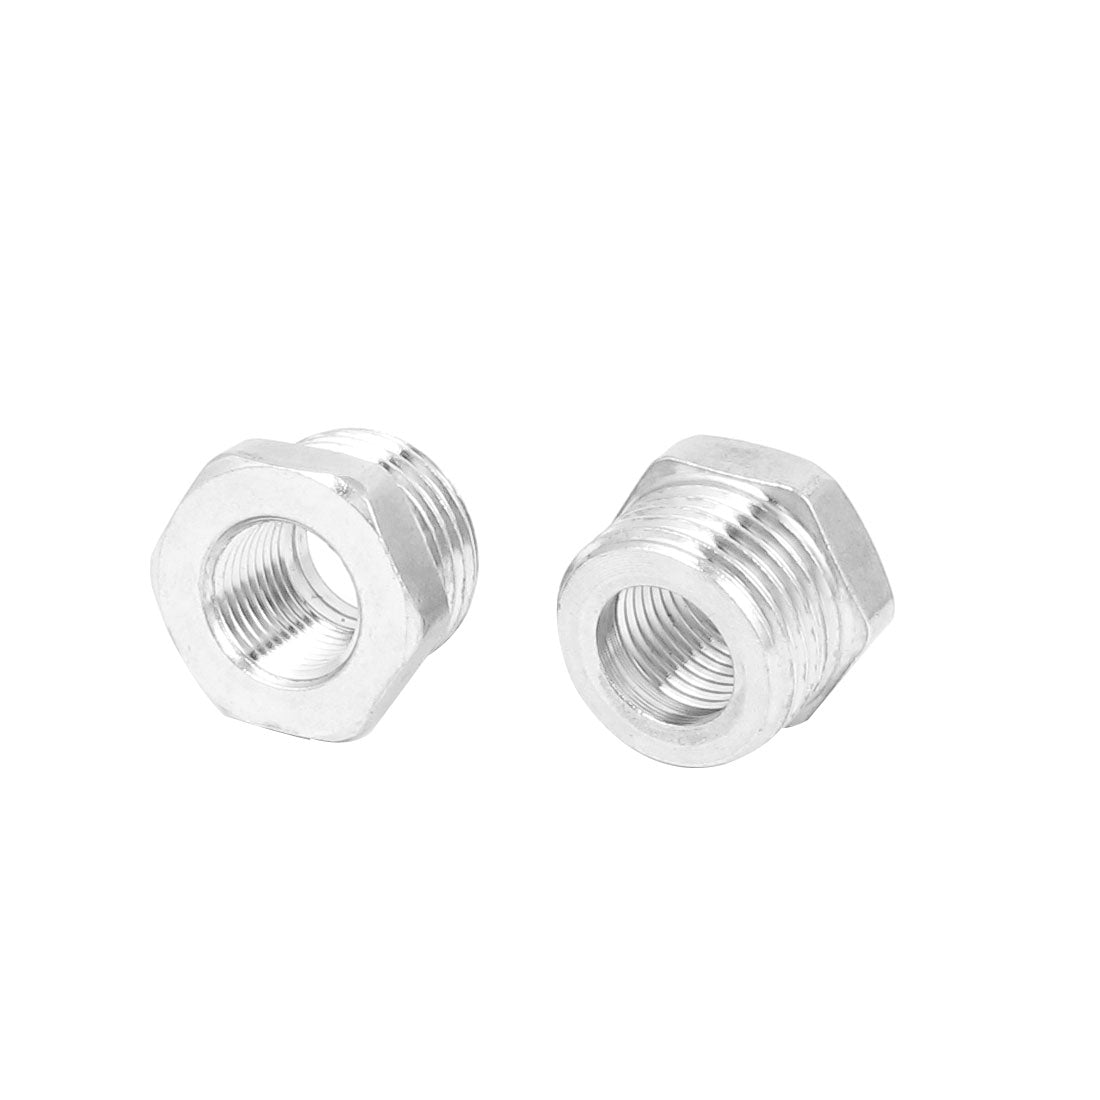 Uxcell Uxcell 1/2BSP Male to 1/4BSP Female Threaded Hex Reducing Bushing Pipe Adapter 2pcs